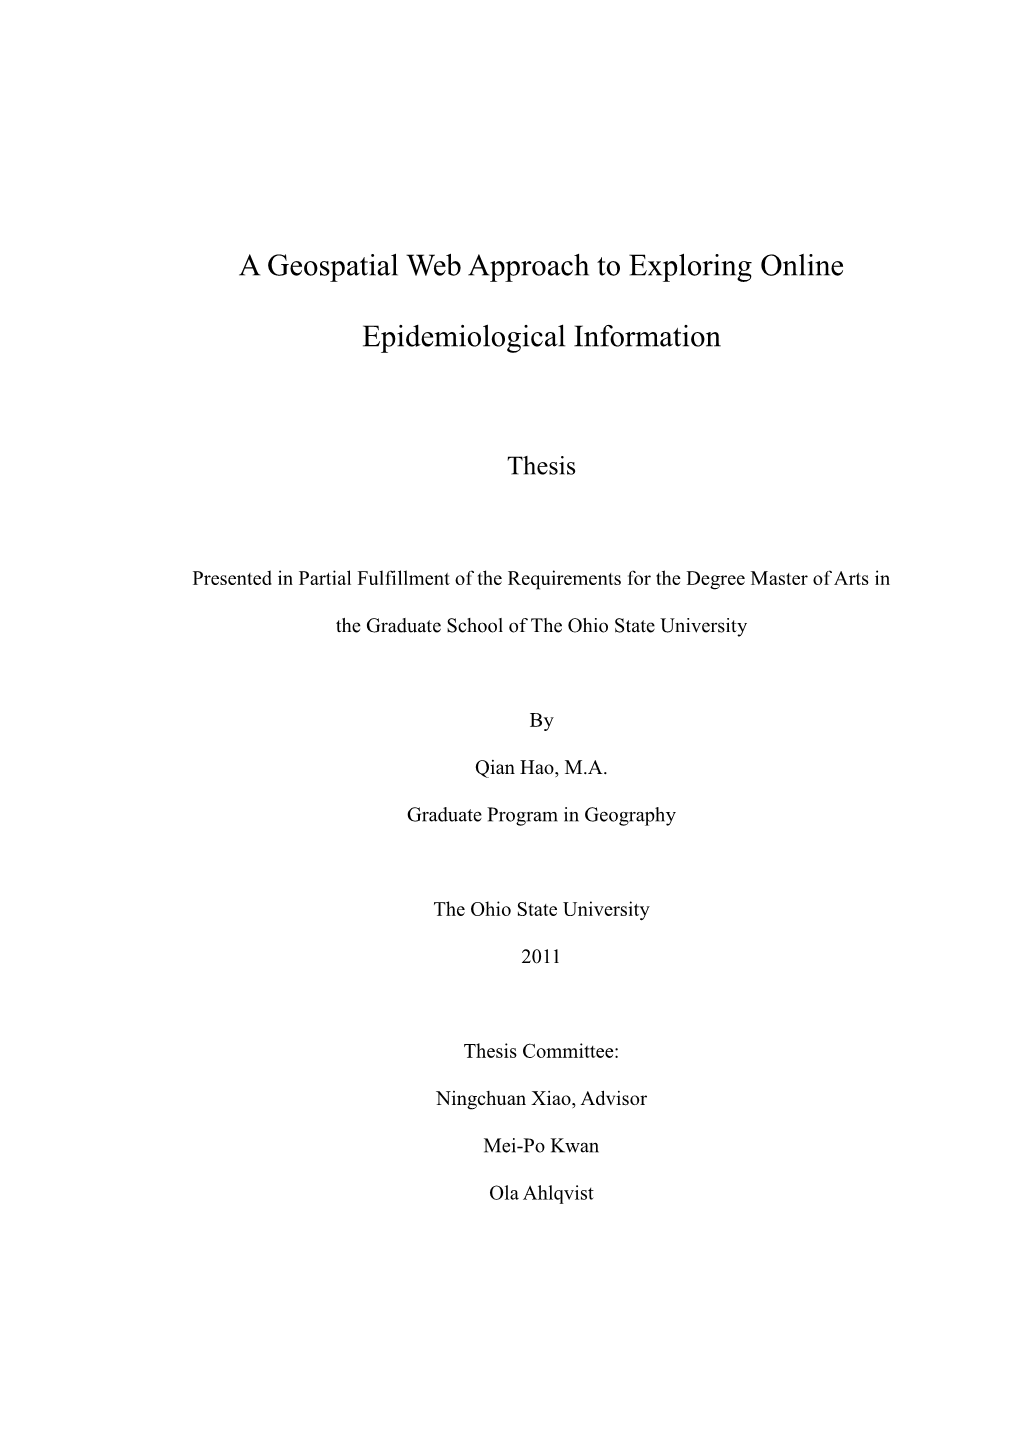 A Geospatial Web Approach to Exploring Online Epidemiological